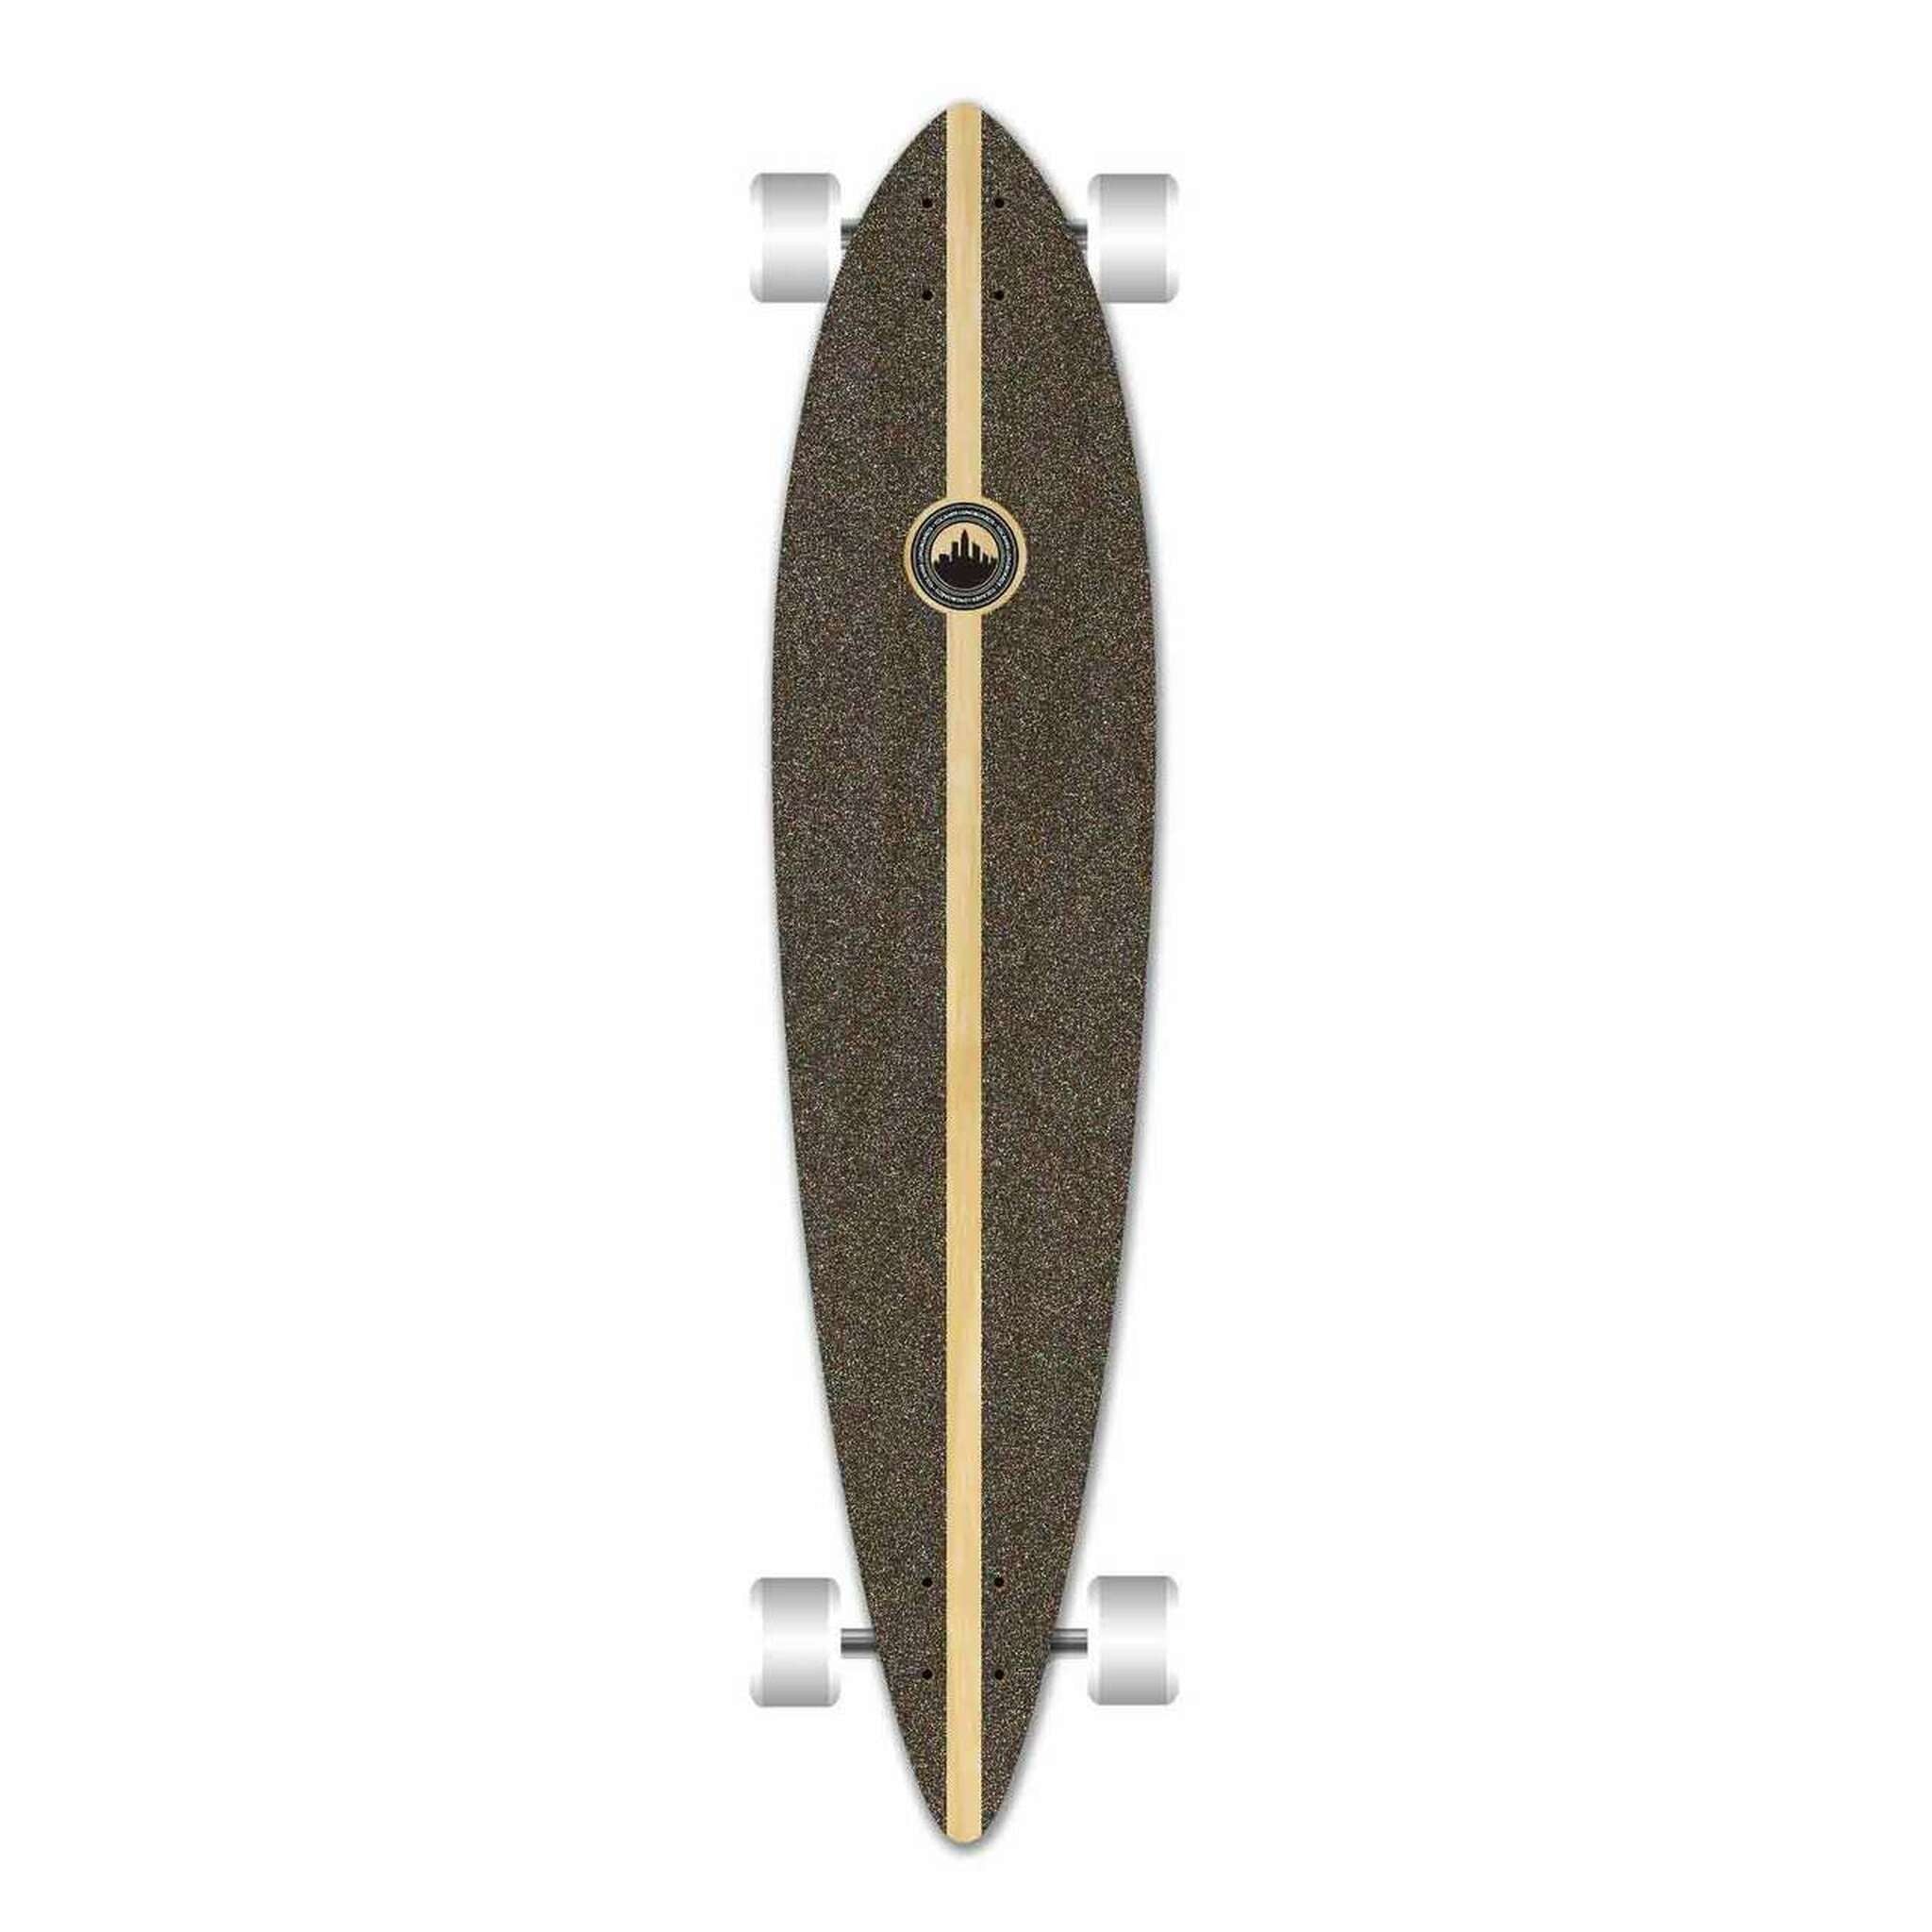 YOCAHER - Route 66 RTE Pintail Longboard - Planche Complete